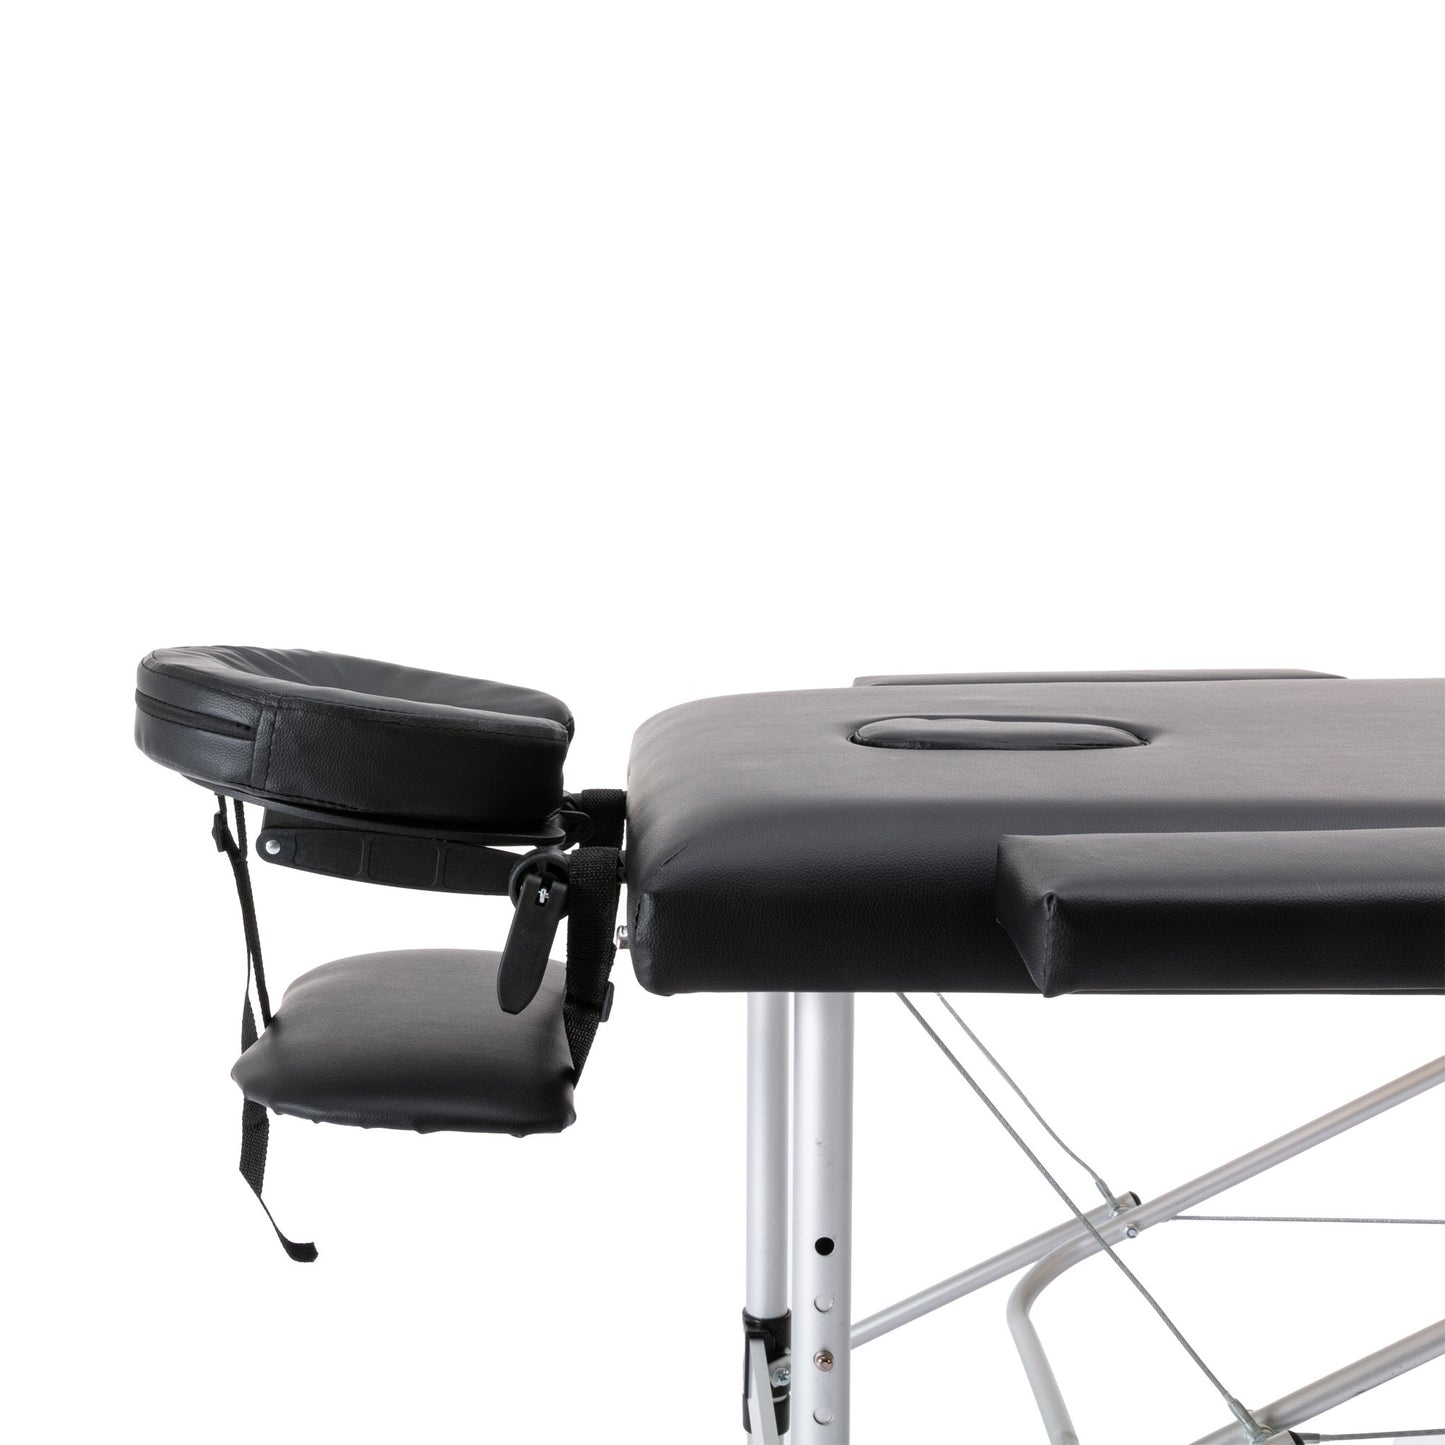 DongHeng Massage Table Portable Massage Bed Lash Bed Facial Table Reiki Table SPA Beds for Esthetician Portable Height Adjustable Carrying Bag & Accessories 2 Section Shop & Home